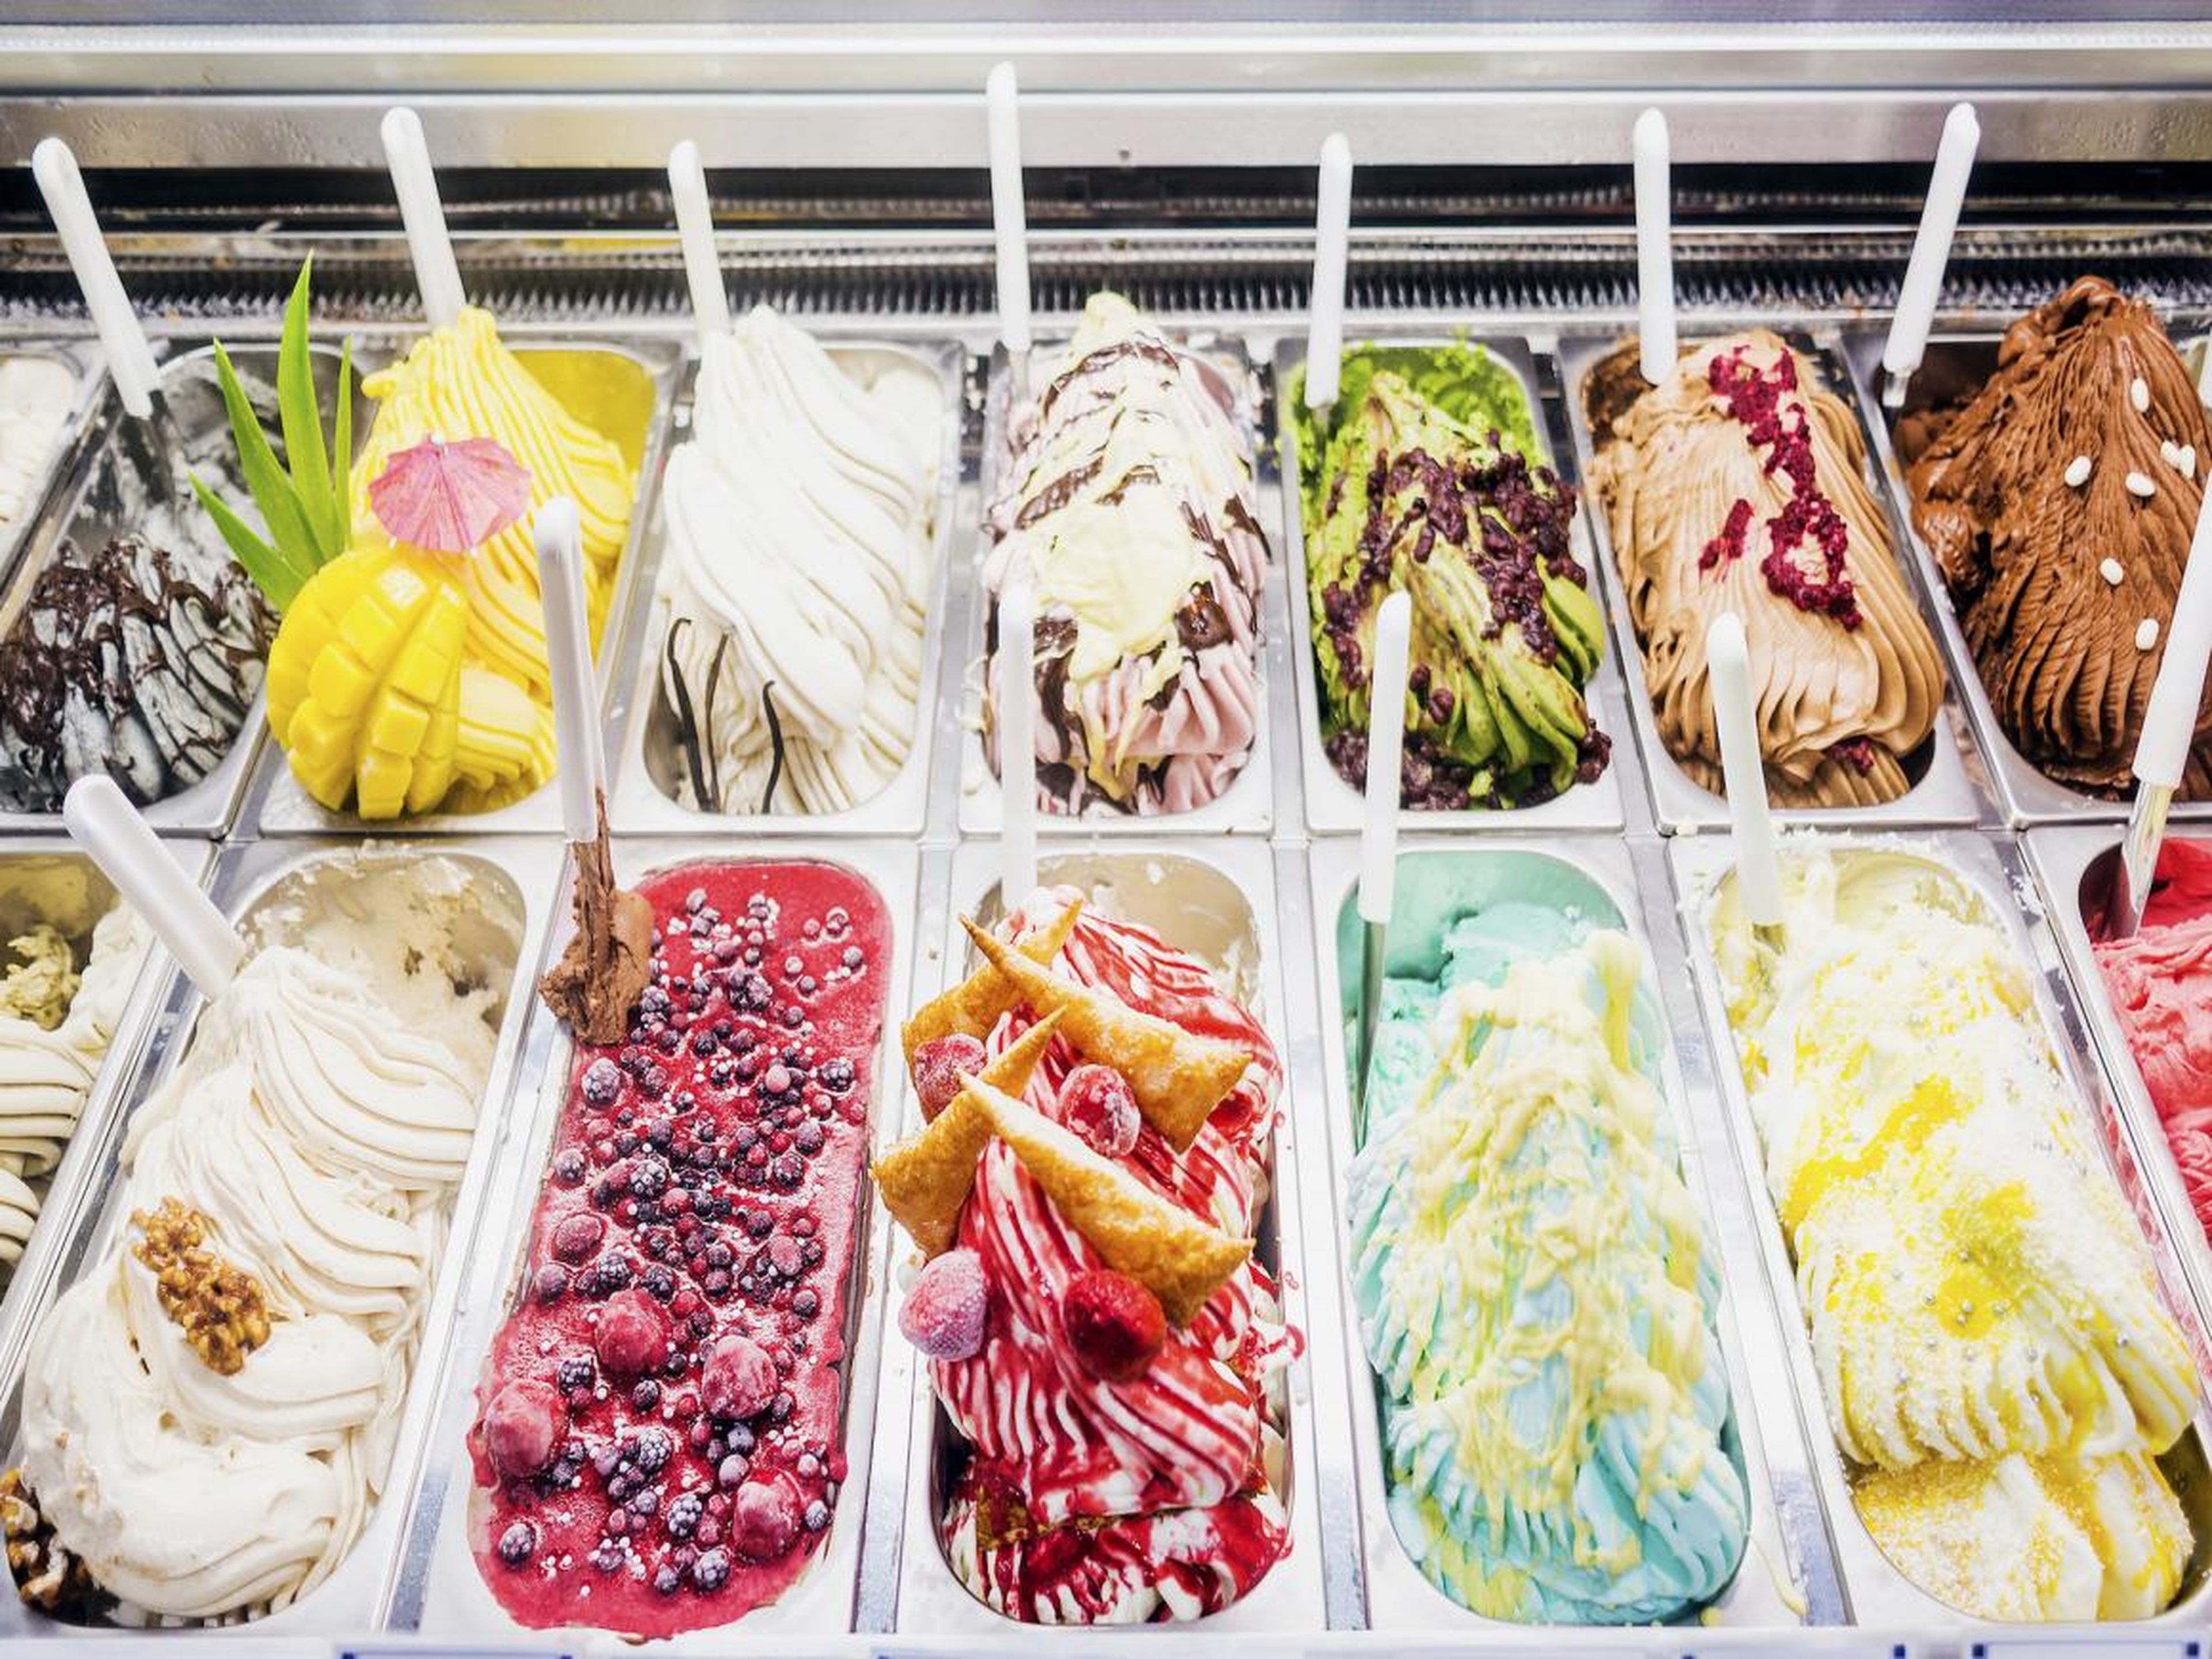 New types of icy treats are on the menu in 2019.